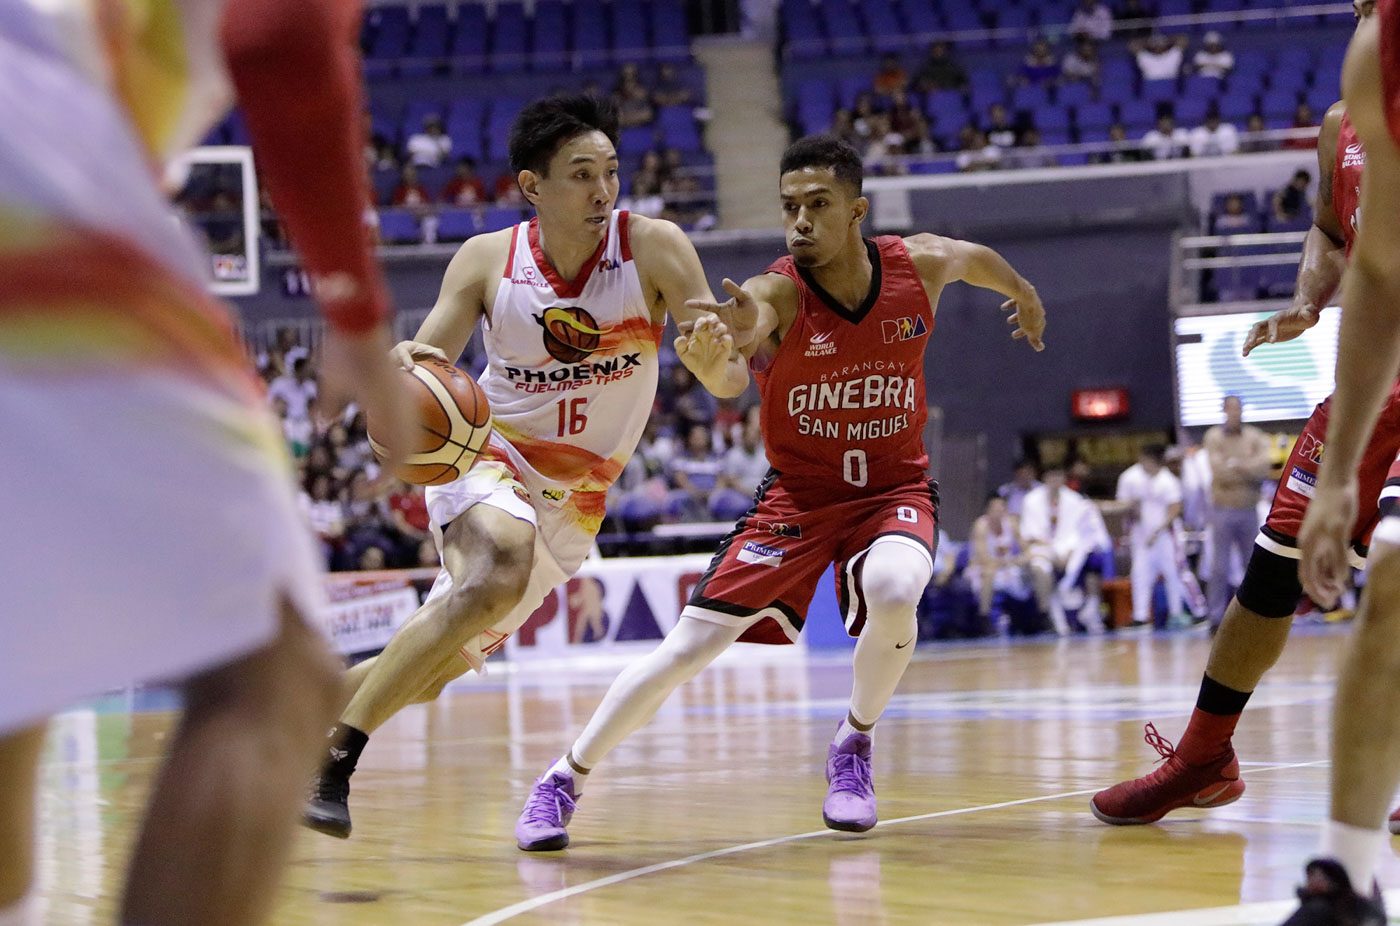 Phoenix rises out of slump to push Ginebra to 3rd straight loss